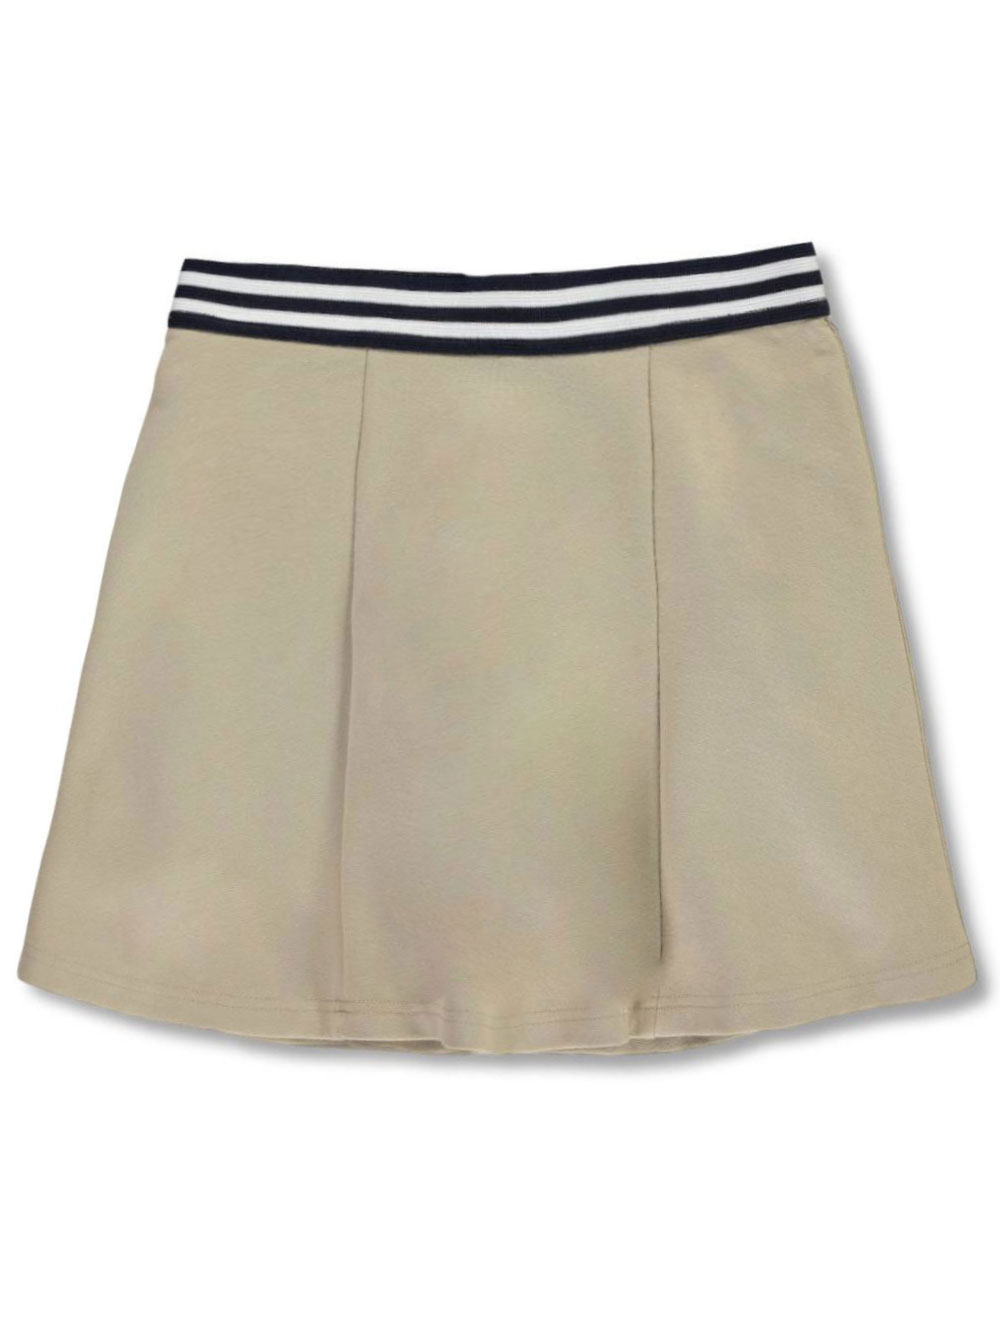 Nautica Girls School Uniform Pleated Scooter with Pockets